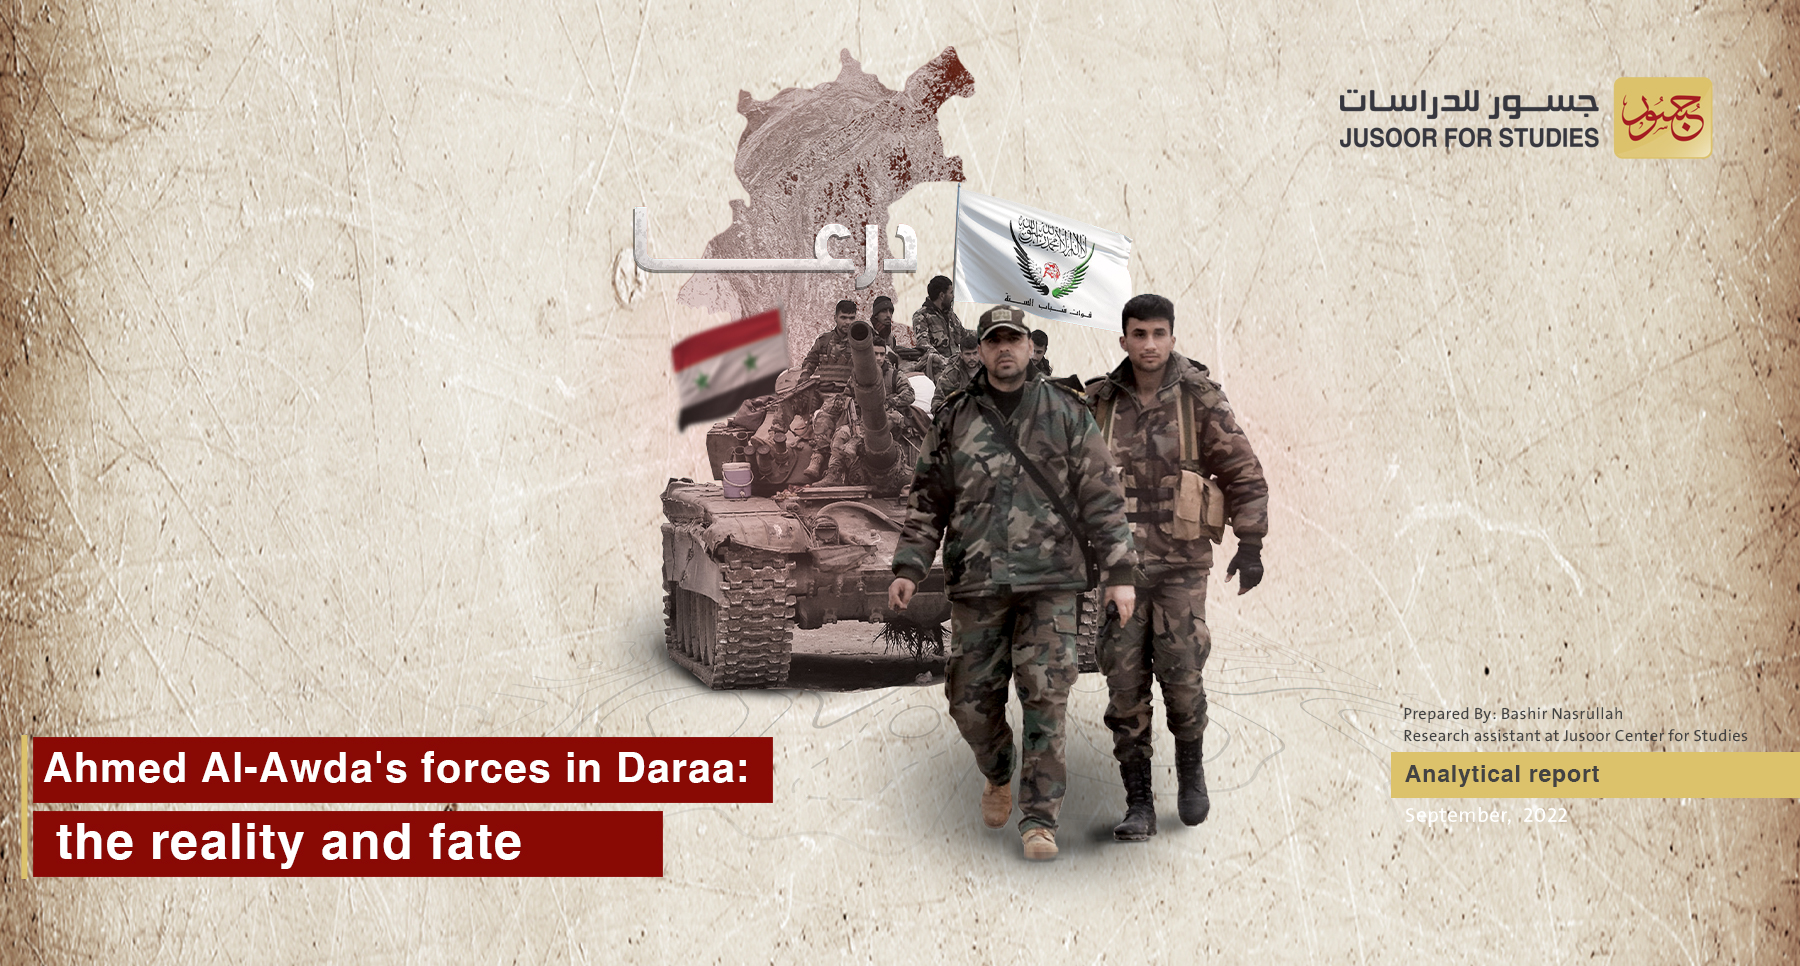 Ahmed Al-Awda's forces in Daraa: the reality and fate